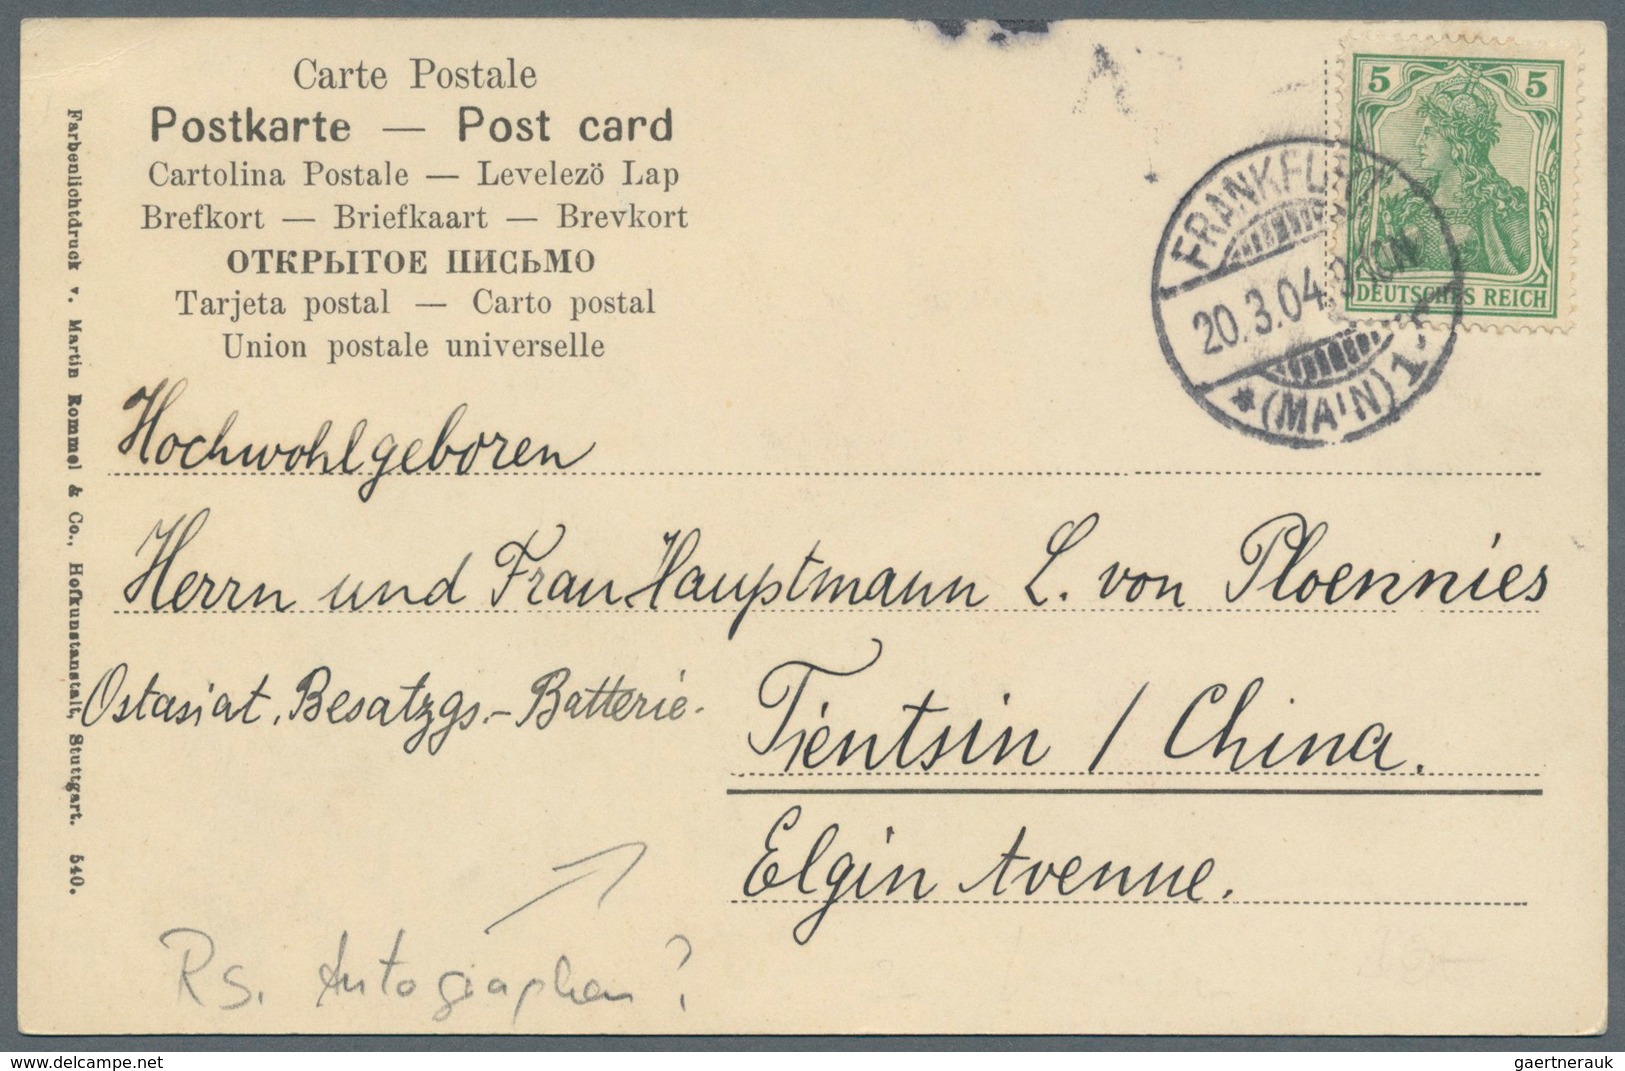 China - Incoming Mail: 1899/1906, Germany, correspondence of UPU cards (5, from Hannover and area) t